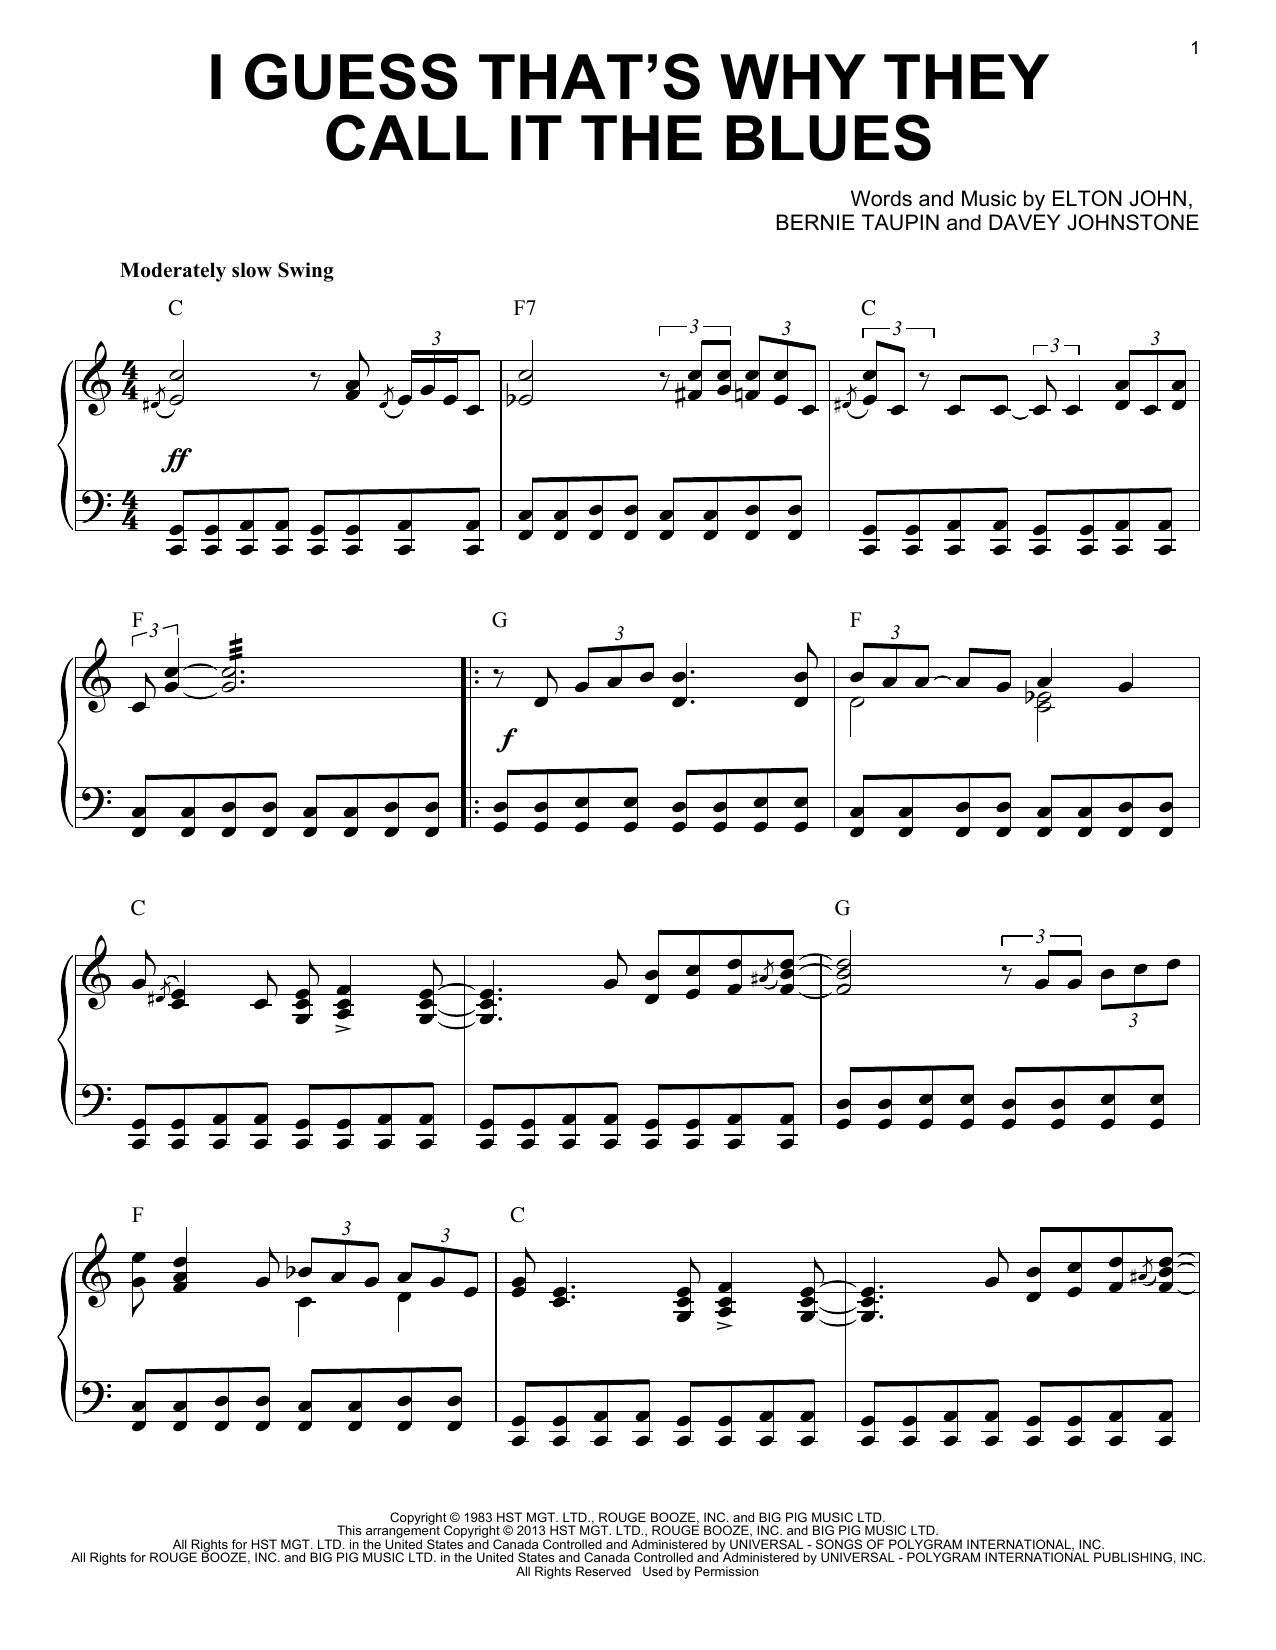 Skælde ud Gum terning Elton John "I Guess That's Why They Call It The Blues [Jazz version] (arr.  Brent Edstrom)" Sheet Music Notes | Download Printable PDF Score 151641